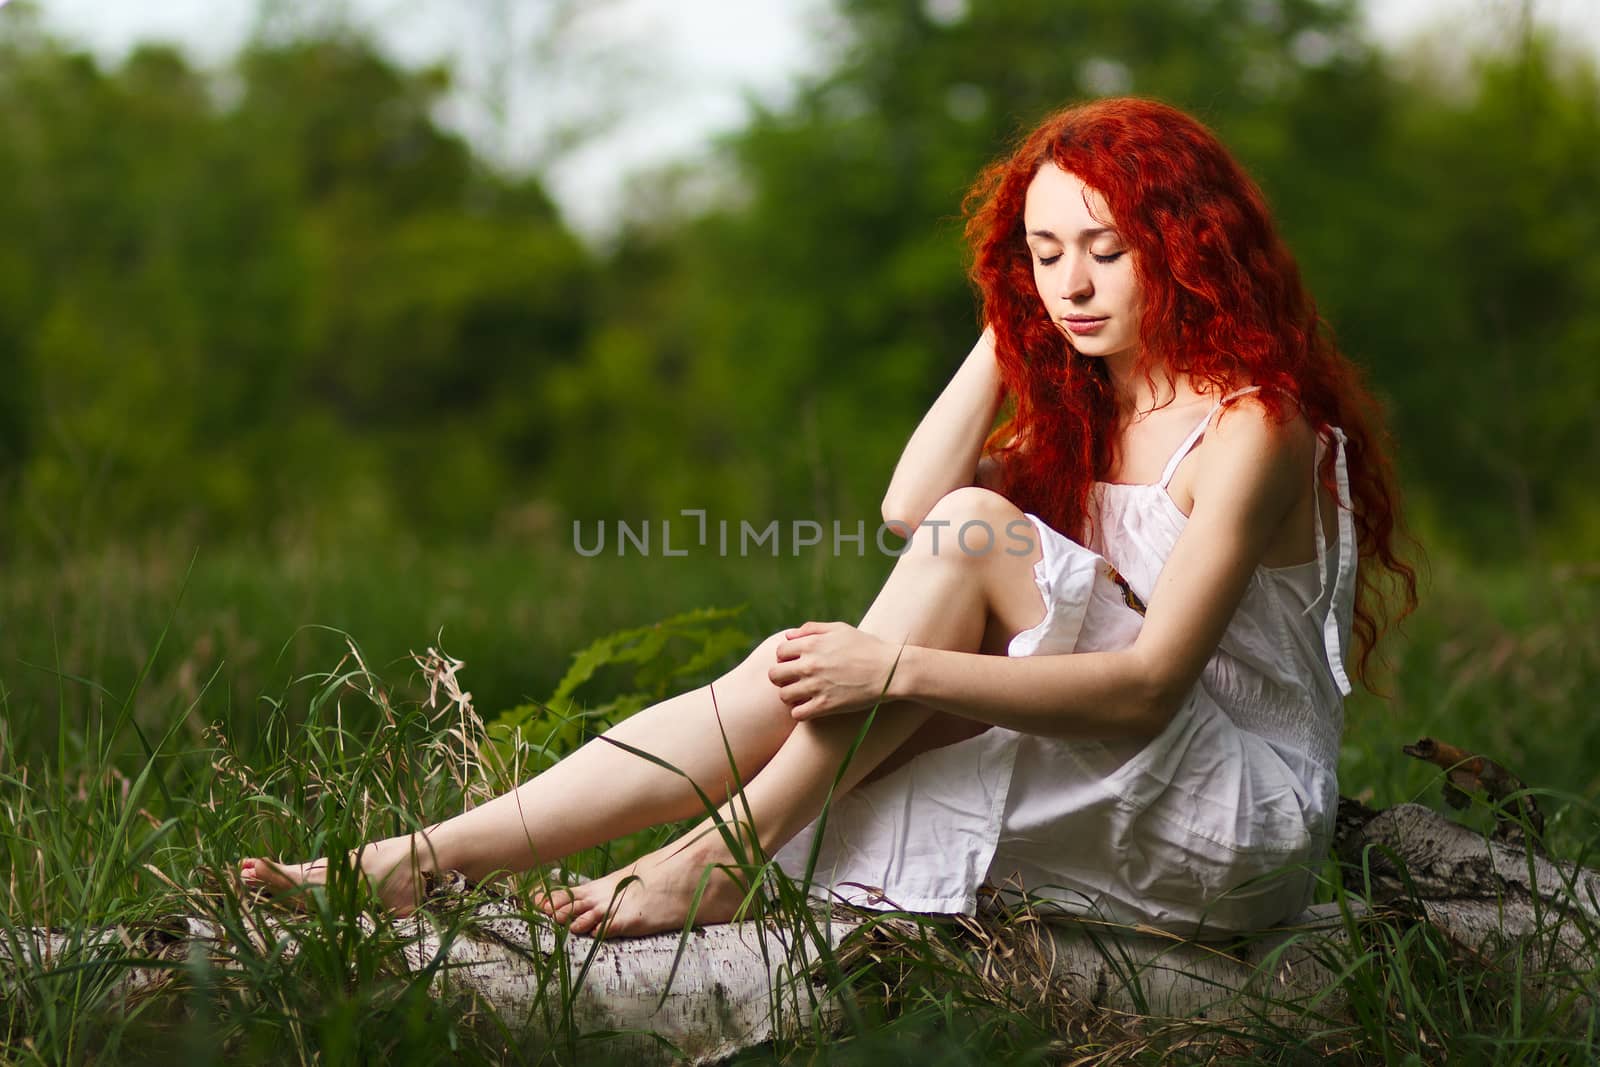 Beautiful redhead girl with curly hair walking under the rays of the sunset in summer spring forest wearing dress